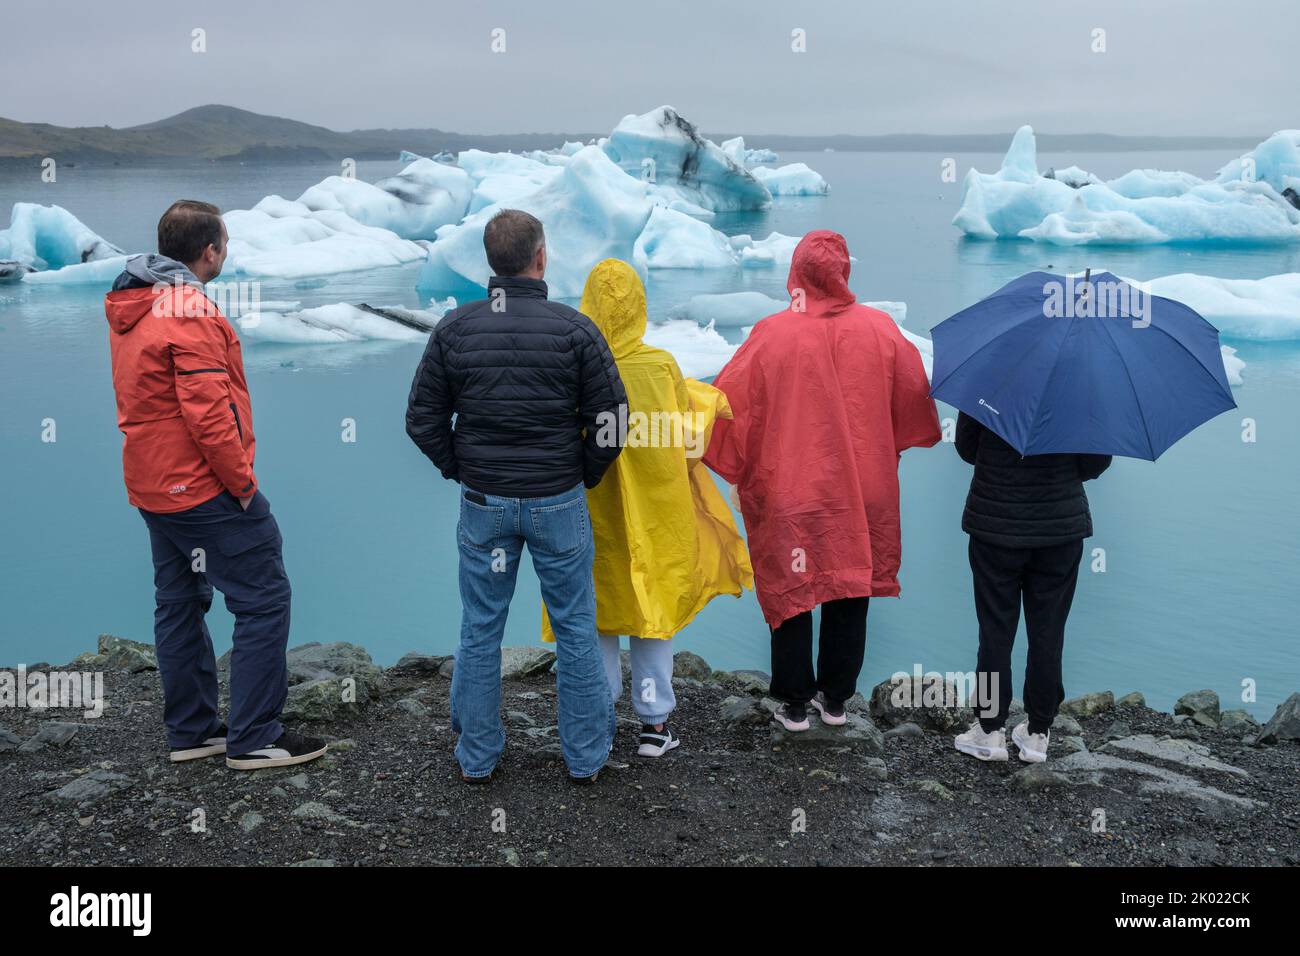 Tourists in colourful waterproofs looking at the icebergs in the Jokulsarlon glacial lagoon, Iceland Stock Photo